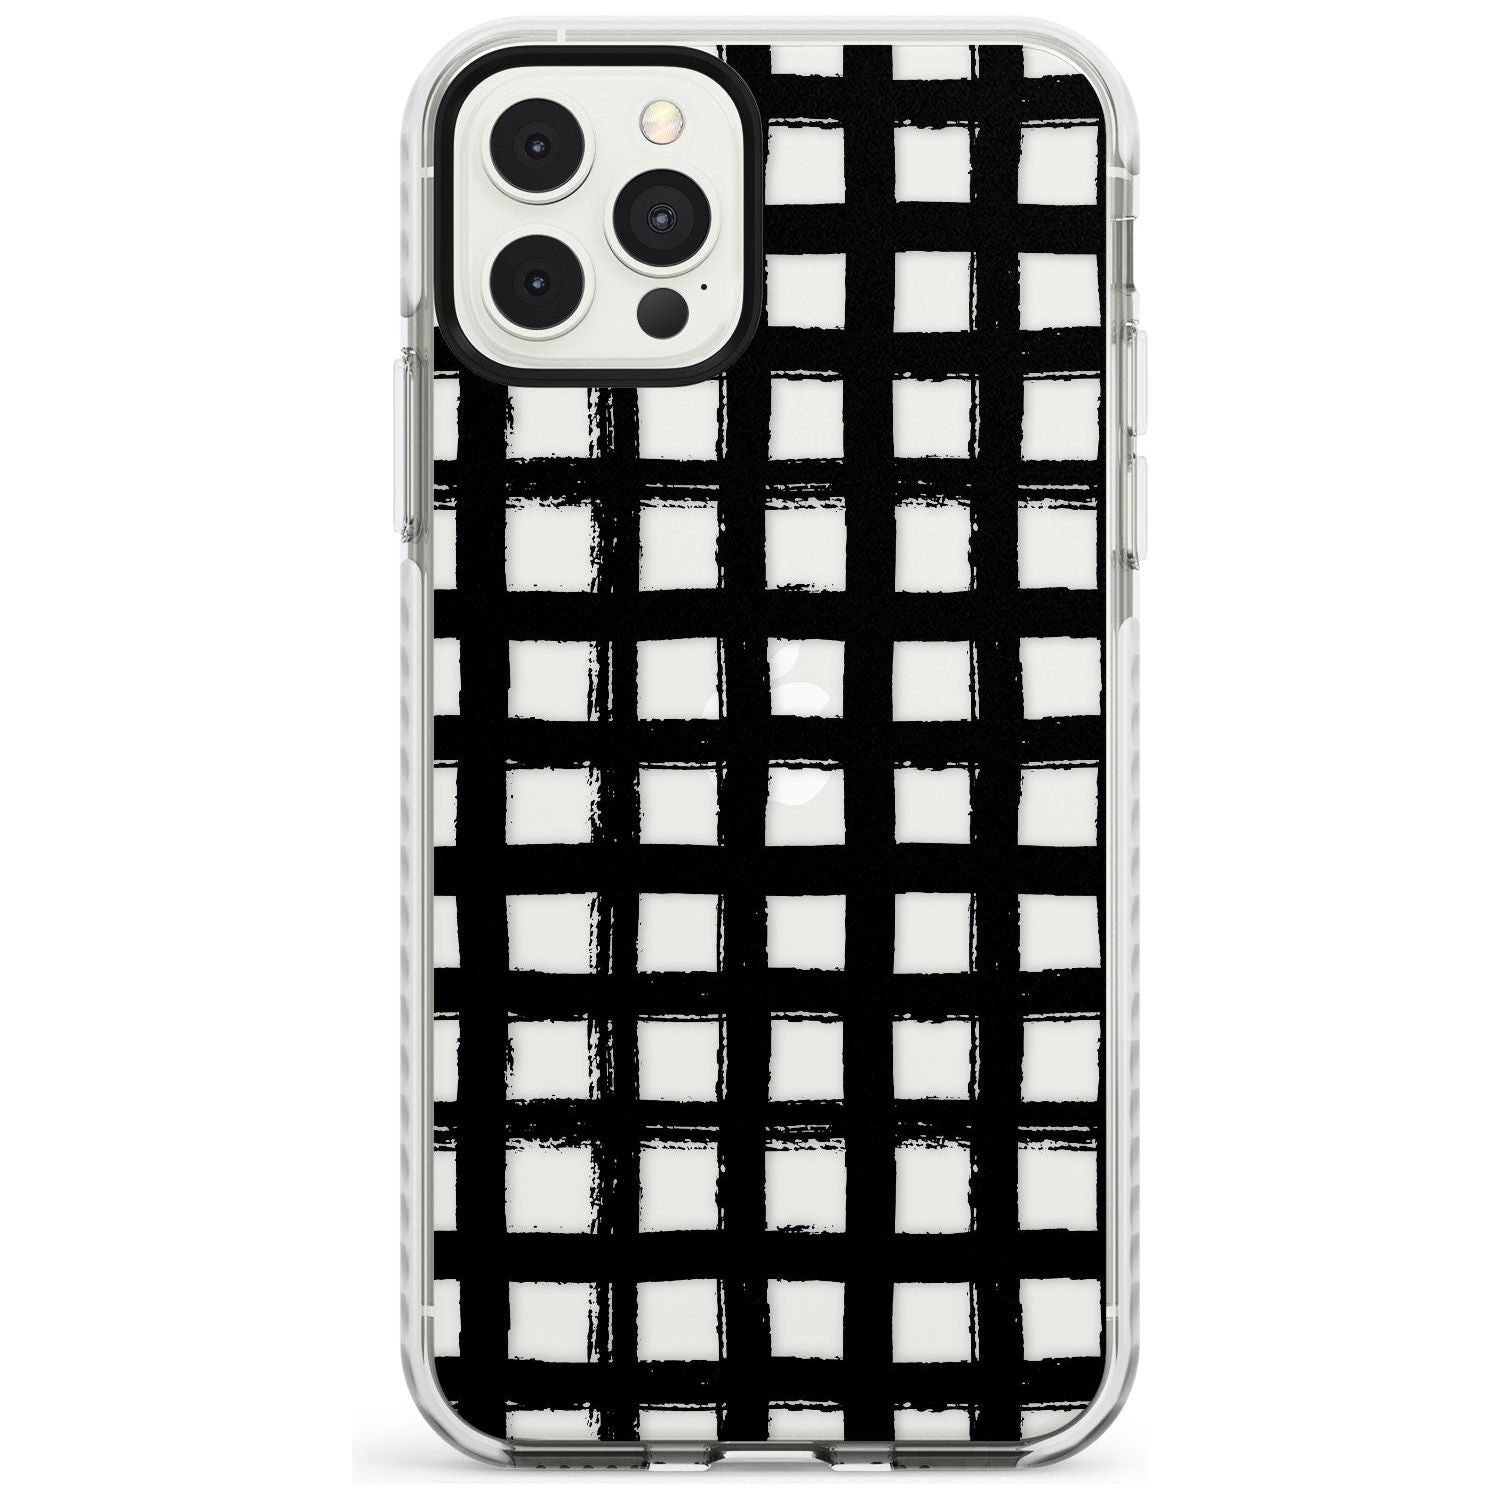 Messy Black Grid - Clear Slim TPU Phone Case for iPhone 11 Pro Max